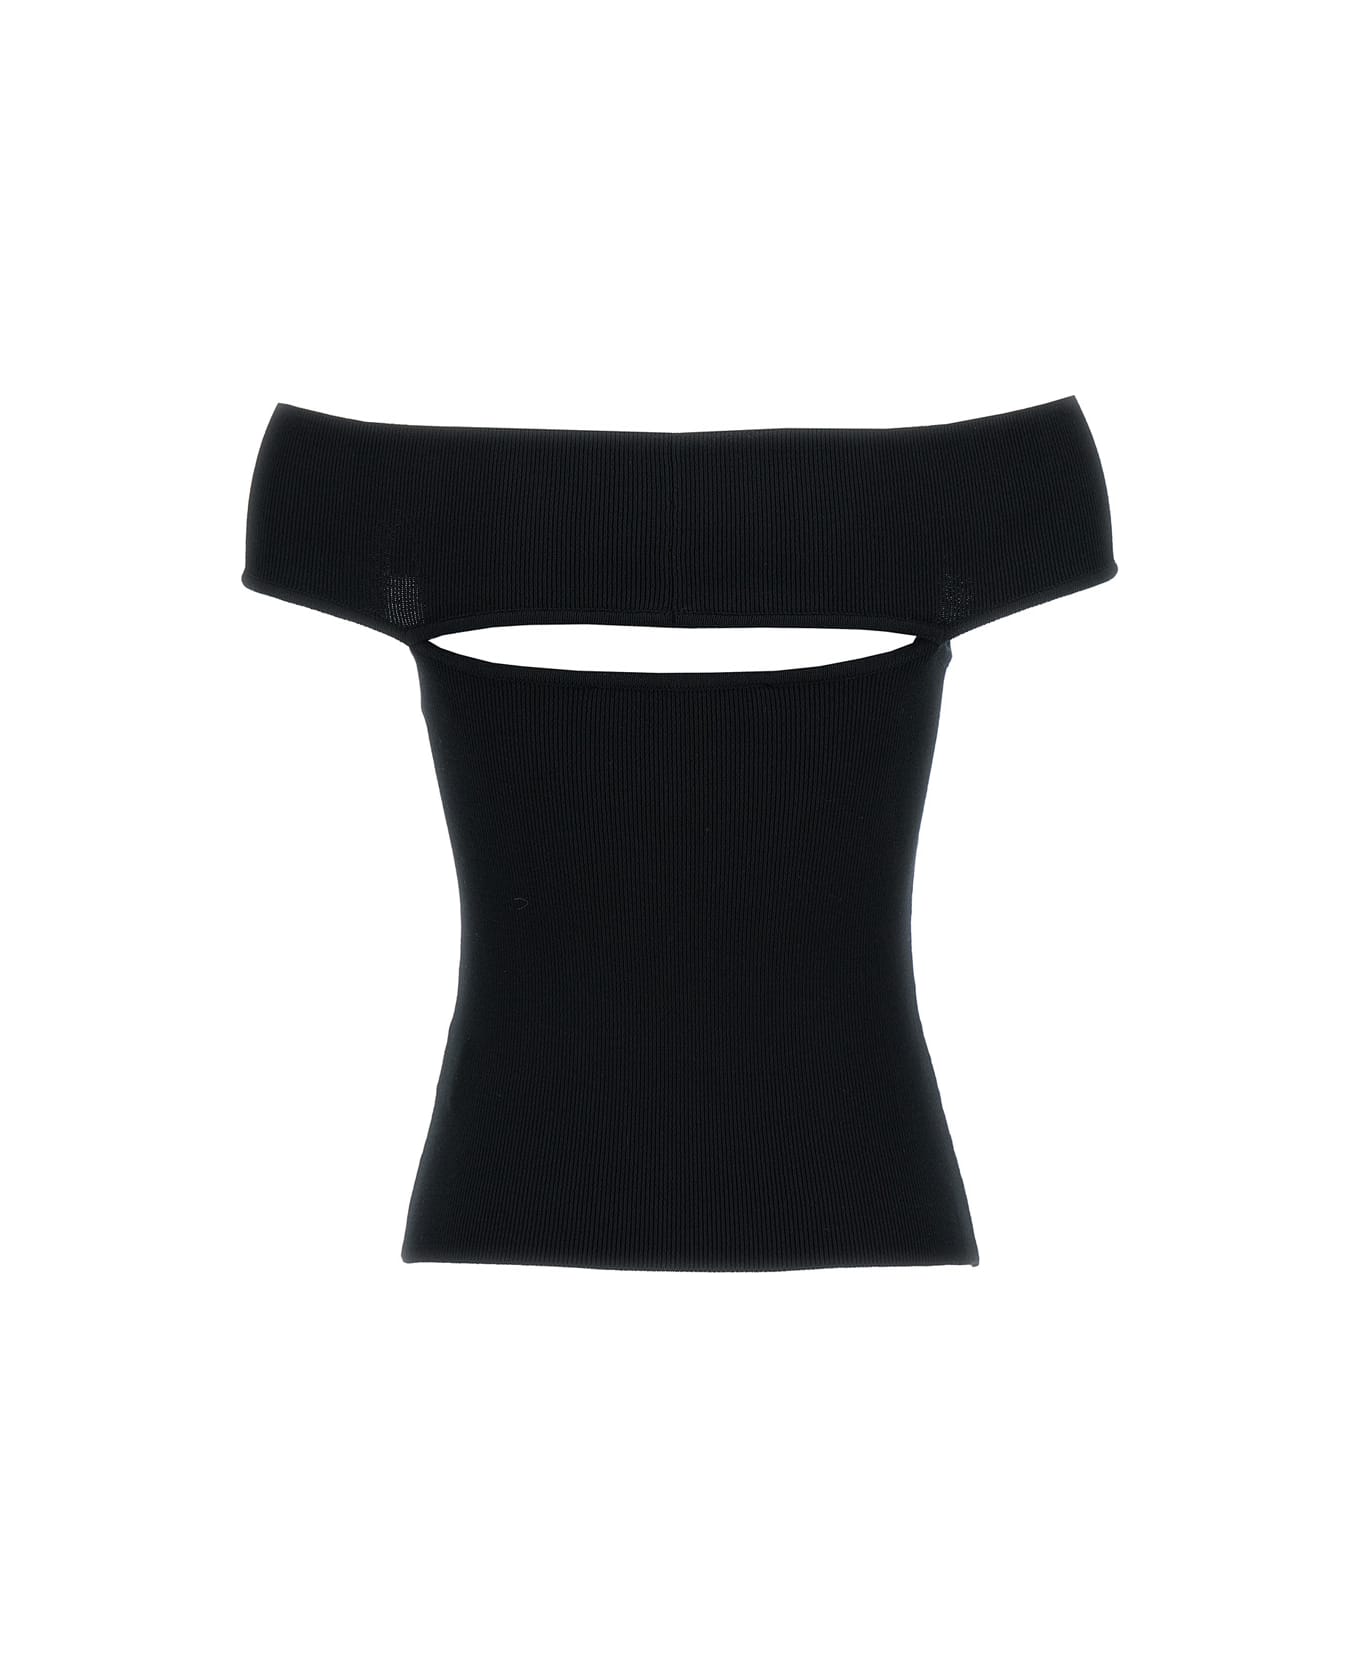 Federica Tosi Black Off-shoulder Top With Cut-out In Ribbed Viscose Blend Woman - Black トップス